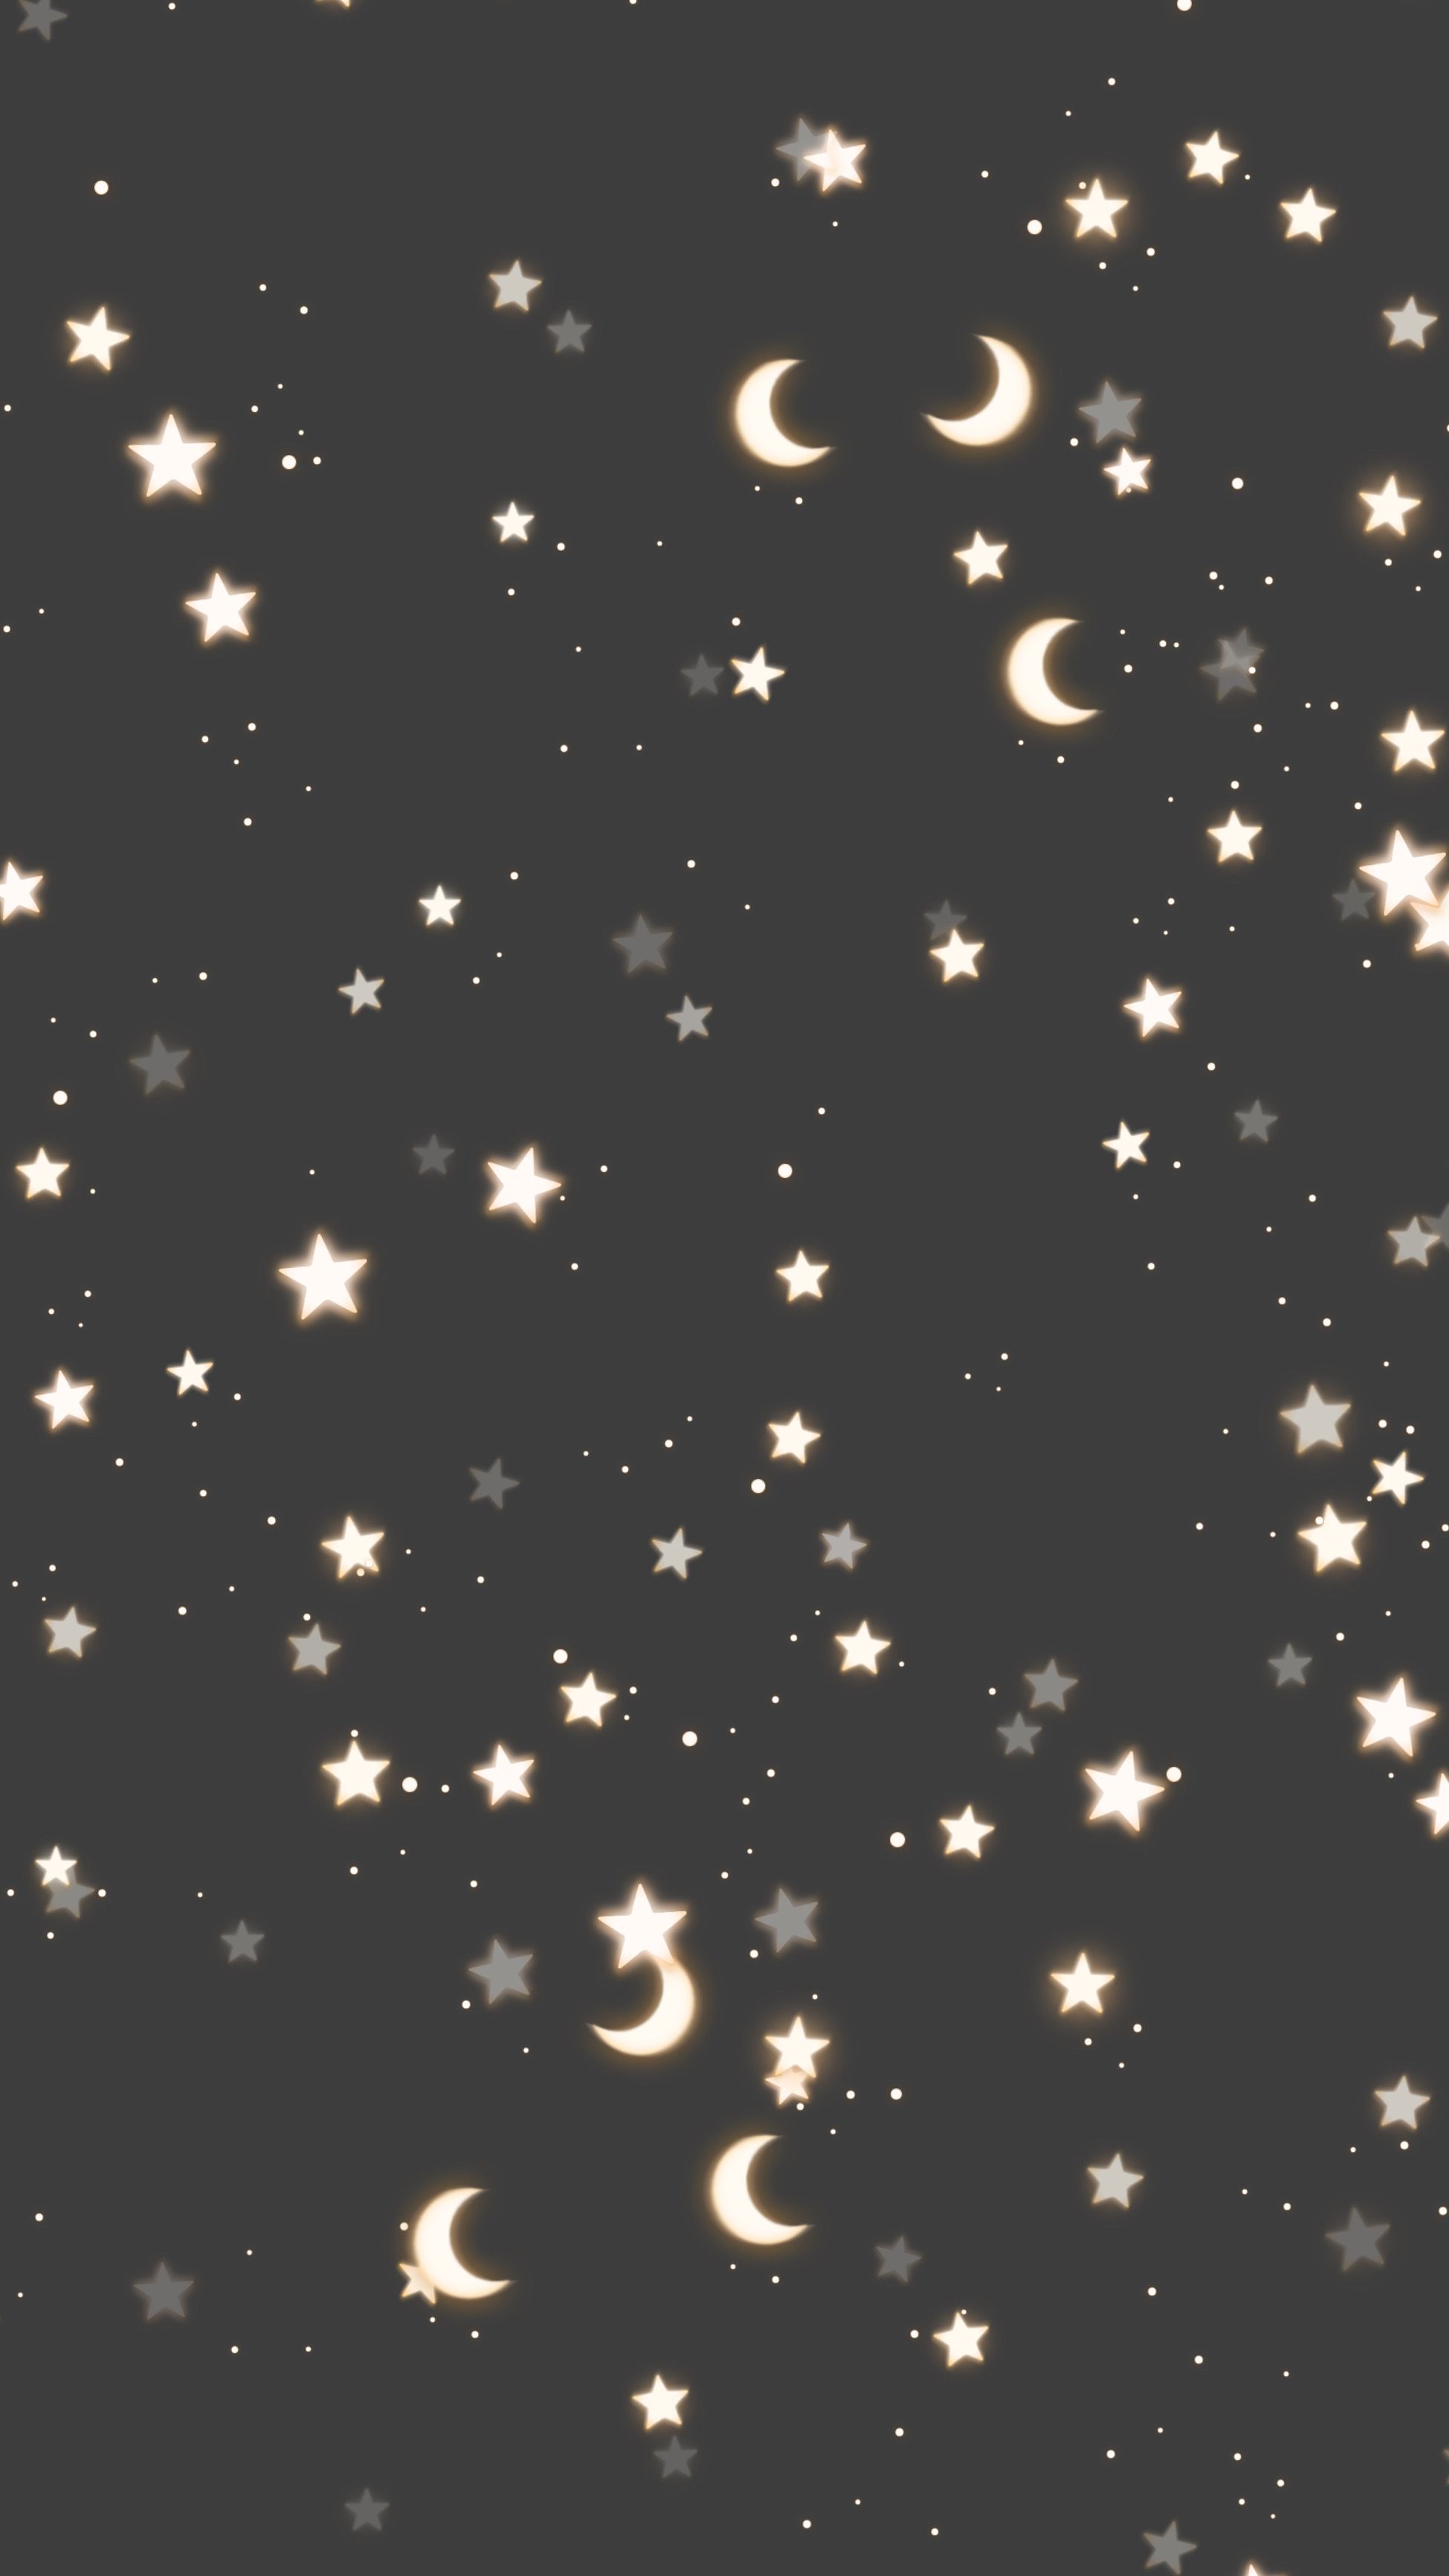 Aesthetic Wallpaper Stars And Moon